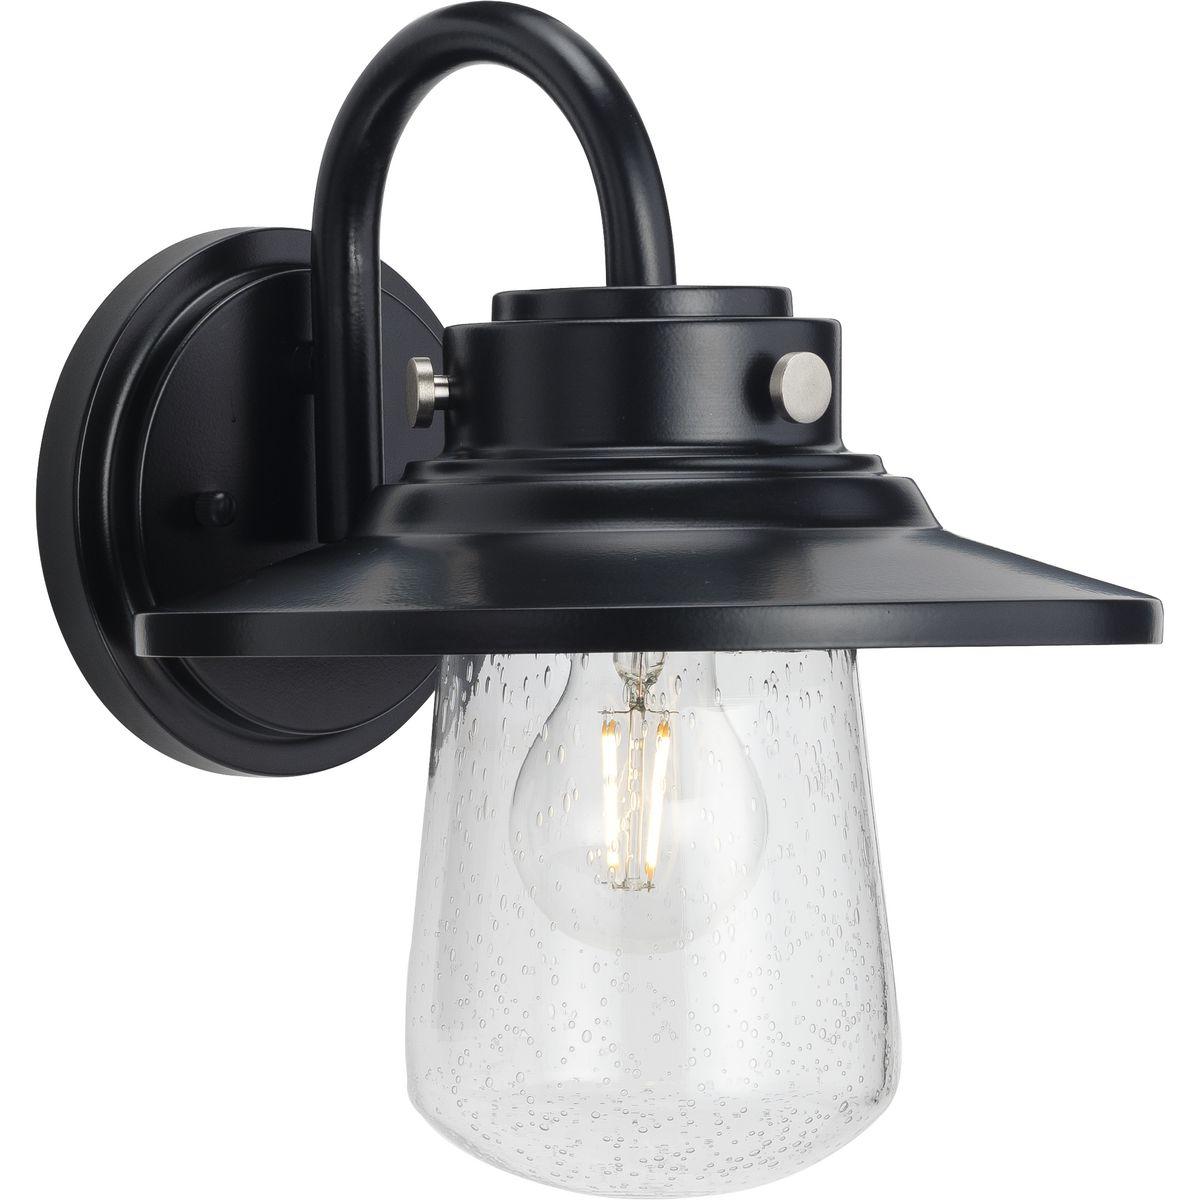 Hubbell P560263-031 Welcome family and friends home with the Tremont Collection 1-Light Clear Seeded Glass Matte Black Industrial Outdoor Medium Wall Lantern Light. A light source glows from within a clear seeded glass shade reminiscent of raindrops on a window after a summe